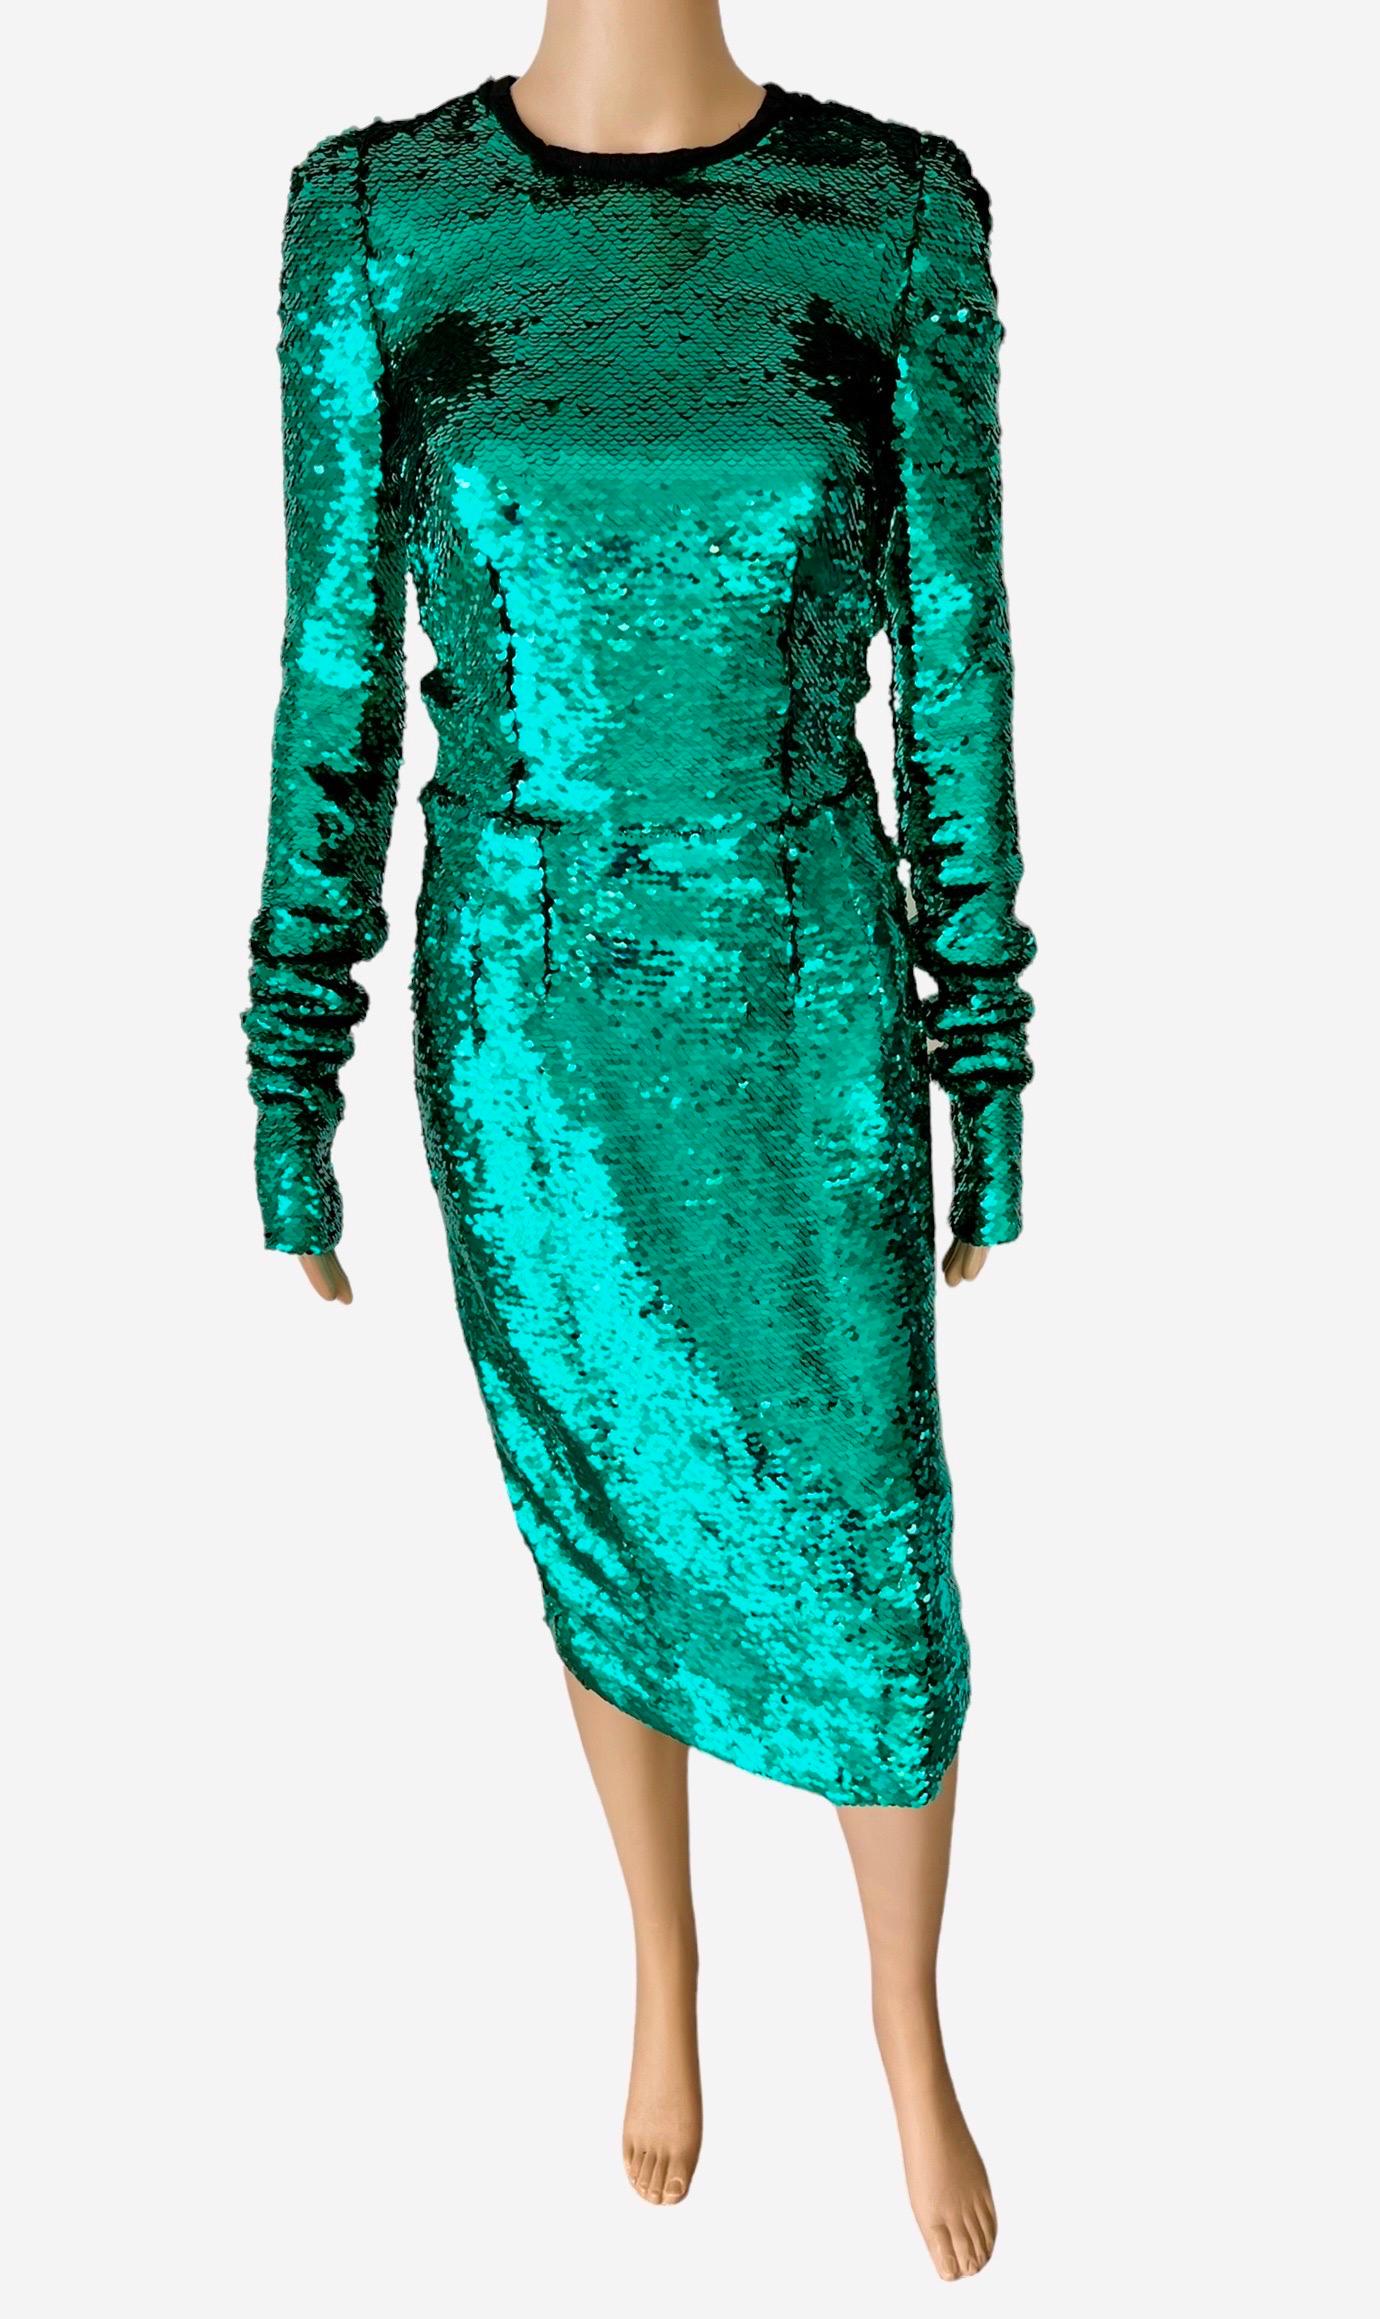 Dolce & Gabbana F/W 2011 Runway Unworn Sequin Embellished Green Evening Dress IT 40

Look 45 from the Fall 2011 Collection

Condition: New with Tags




